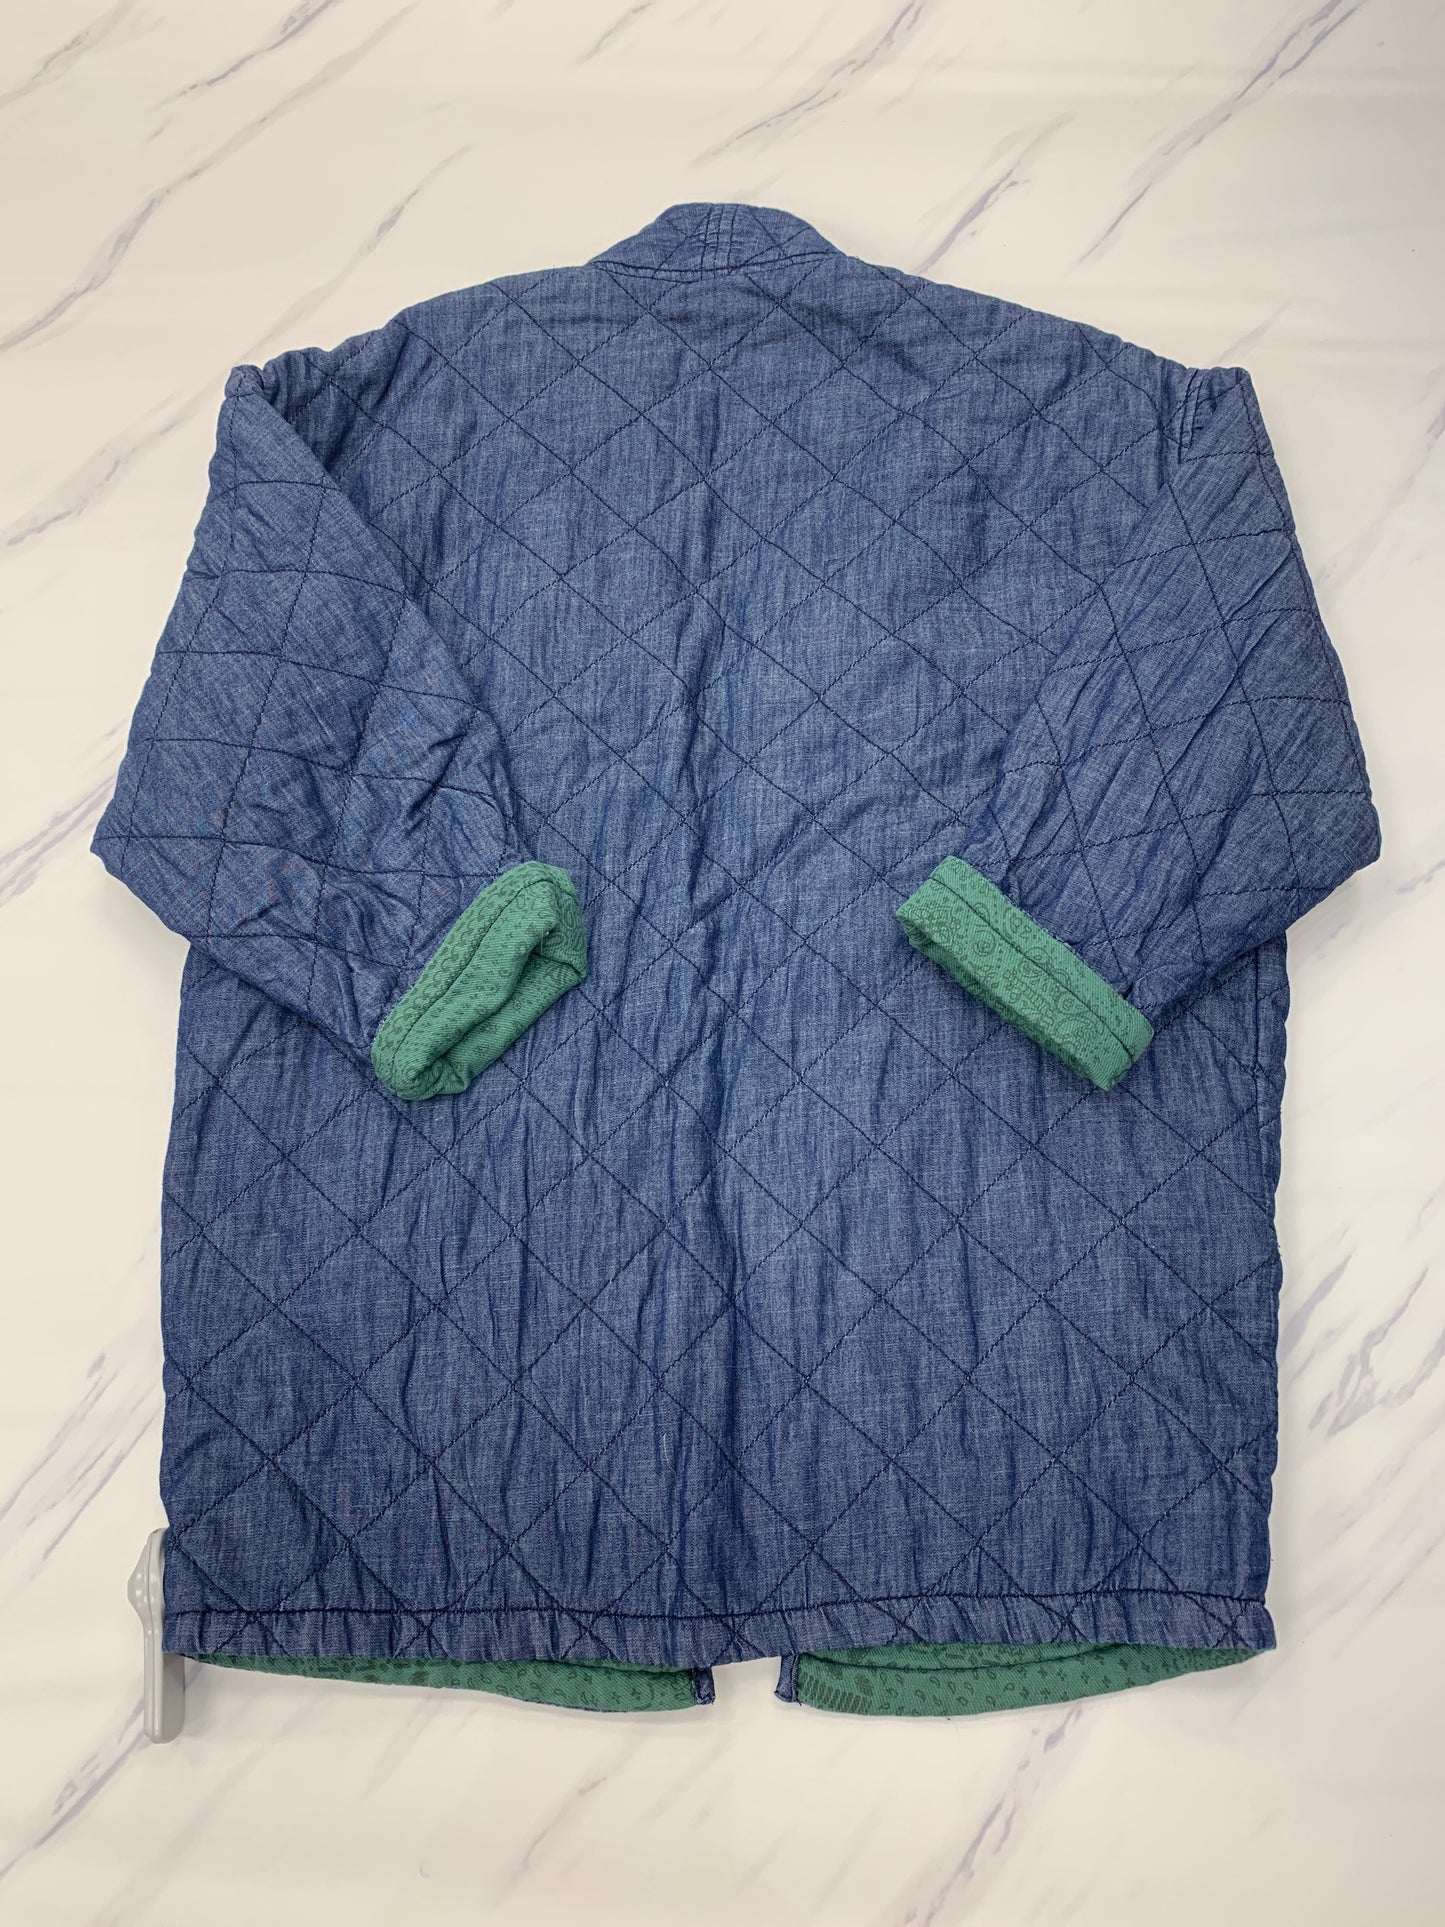 Jacket Other By Clothes Mentor  Size: Xs